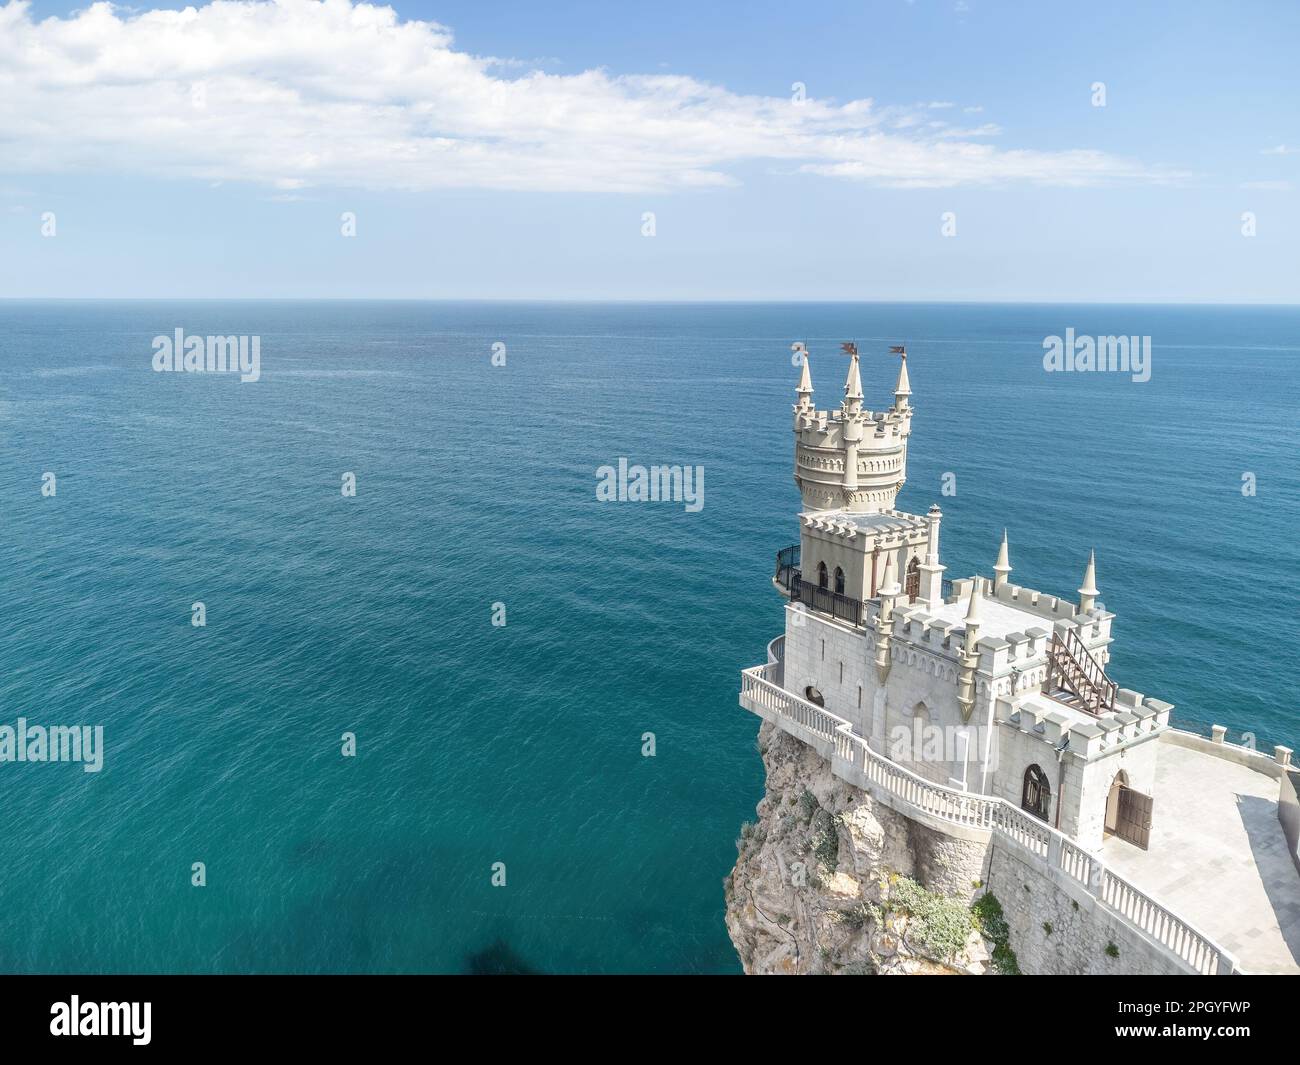 Crimea Swallow's Nest Castle on the rock over the Black Sea. It is a tourist attraction of Crimea. Amazing aerial view of the Crimea coast with the Stock Photo